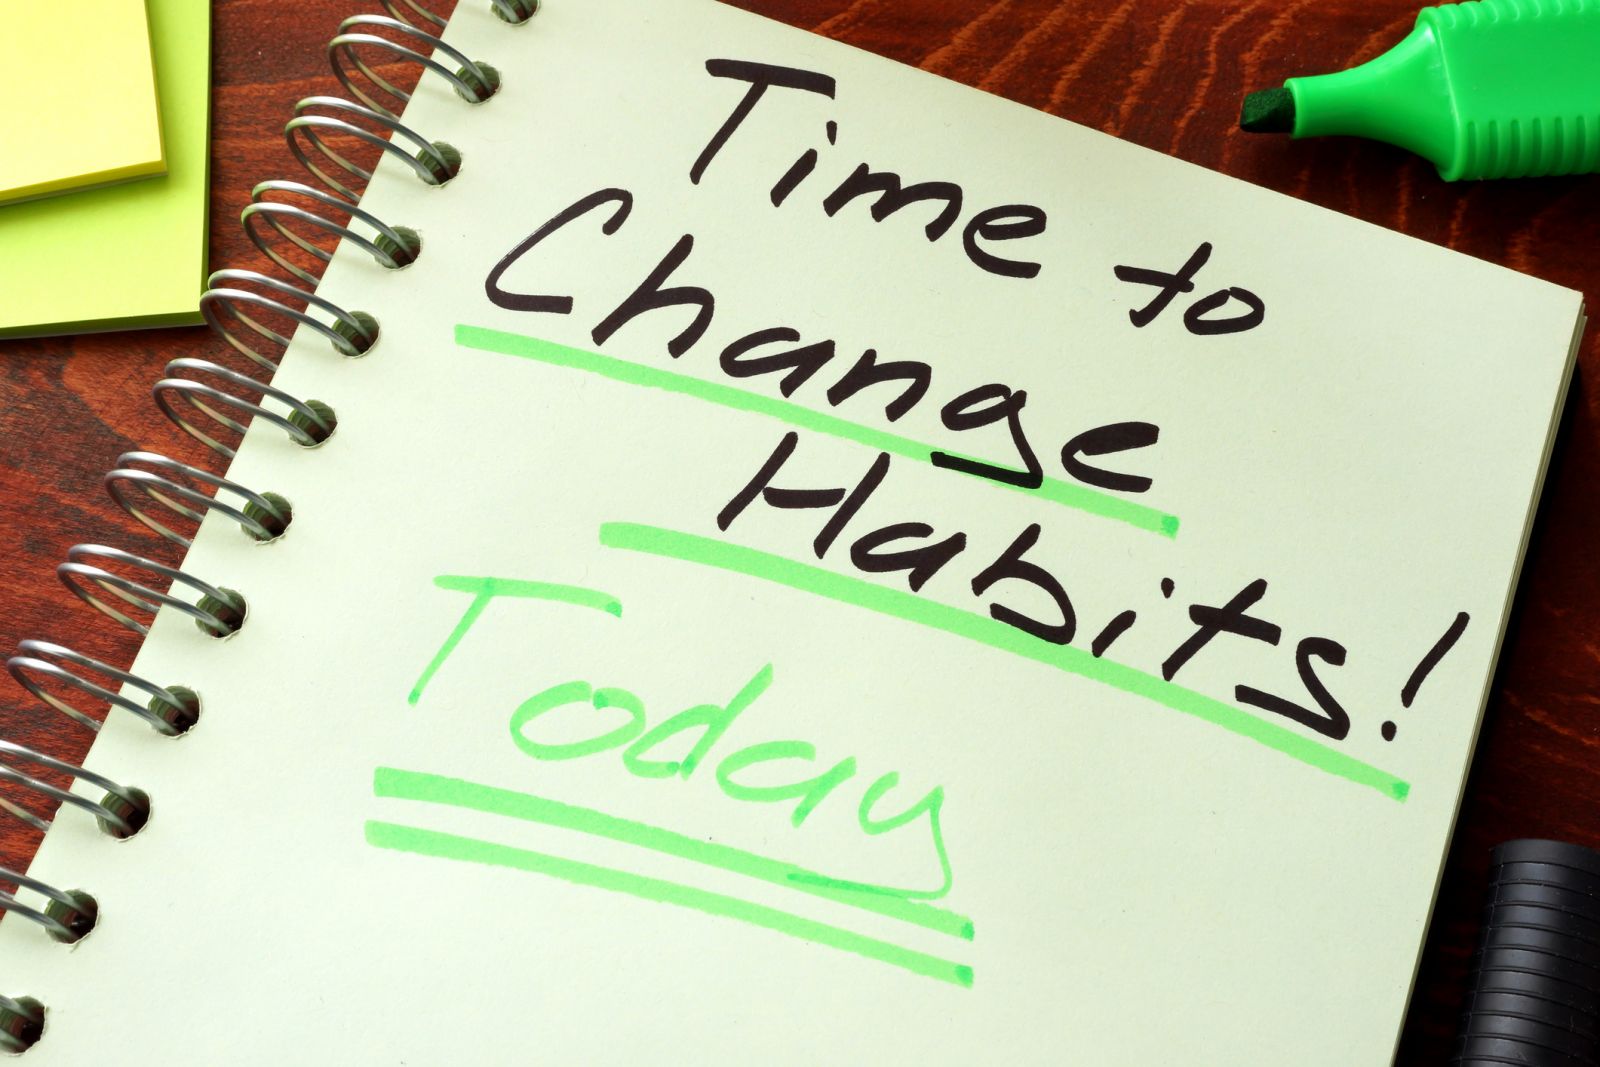 Changing your health habits: Some habits you should consider changing